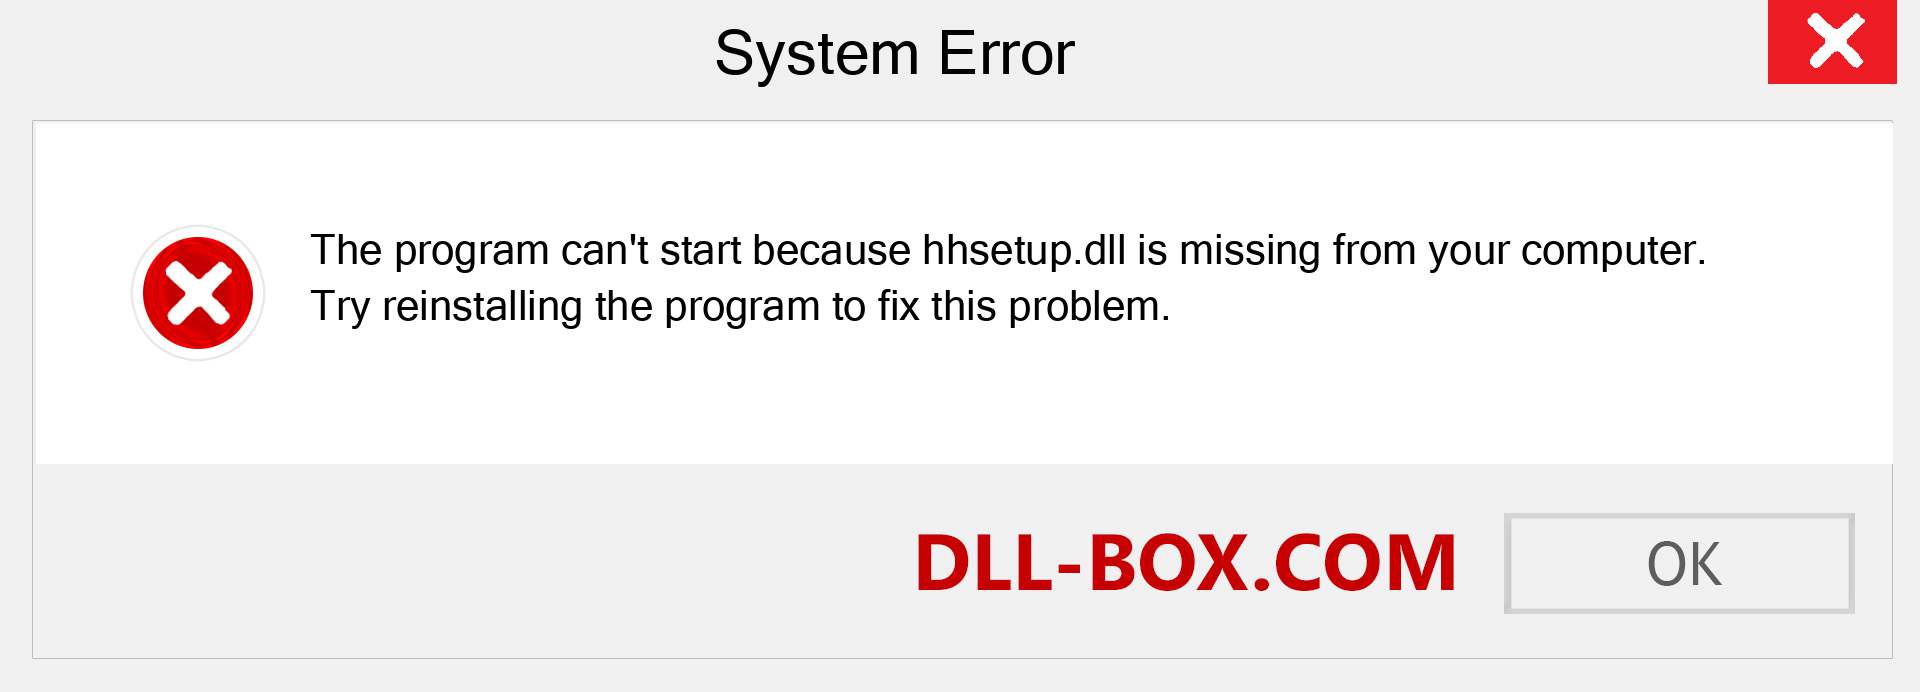  hhsetup.dll file is missing?. Download for Windows 7, 8, 10 - Fix  hhsetup dll Missing Error on Windows, photos, images